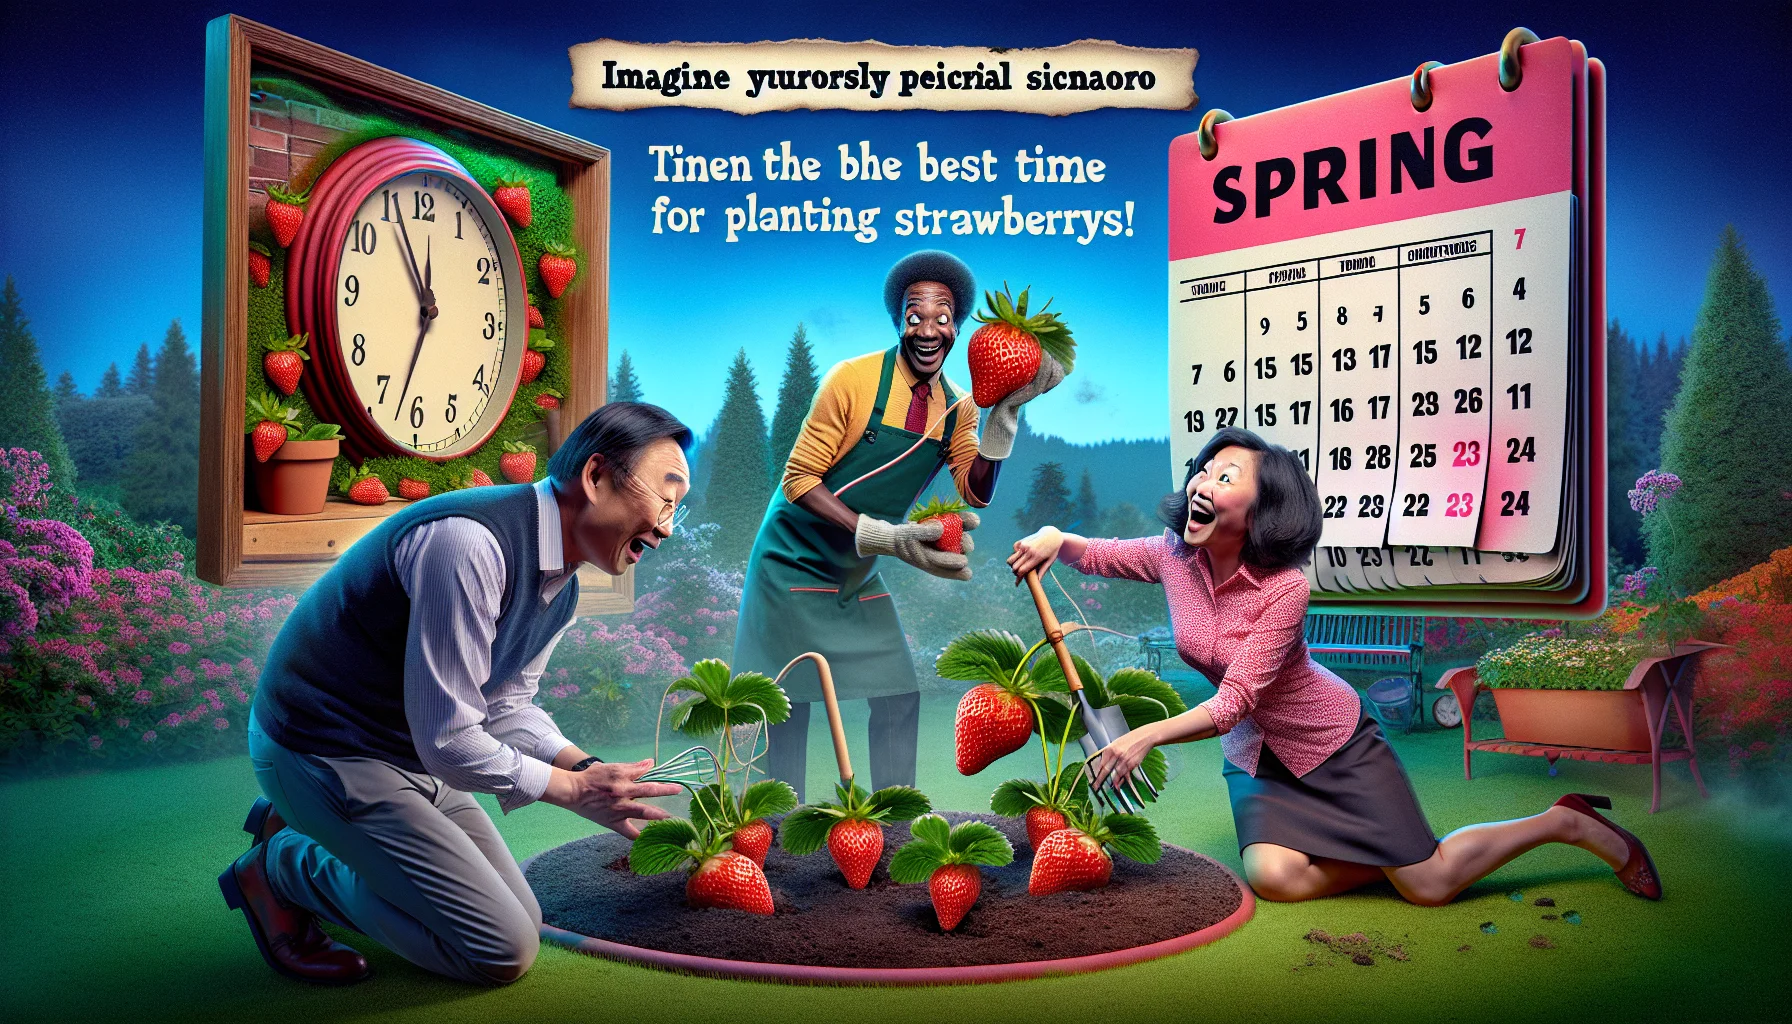 Imagine a humorously peculiar scenario representing the best time for planting strawberries. Set in a vibrant garden at dusk, where the climate looks charmingly ideal. A middle-aged Asian male is planting strawberry seedlings, mildly surprised when the plants immediately sprout juicy strawberries. Nearby, a tickled African-American lady is using an oversized vintage wall-clock to make sure it's the 'strawberry time'. A visibly laughing South Asian child appears to engage in a playful tug-of-war with an animated calendar indicating spring, the prime planting season. This eclectic scene exudes fun and encourages everyone to love gardening.